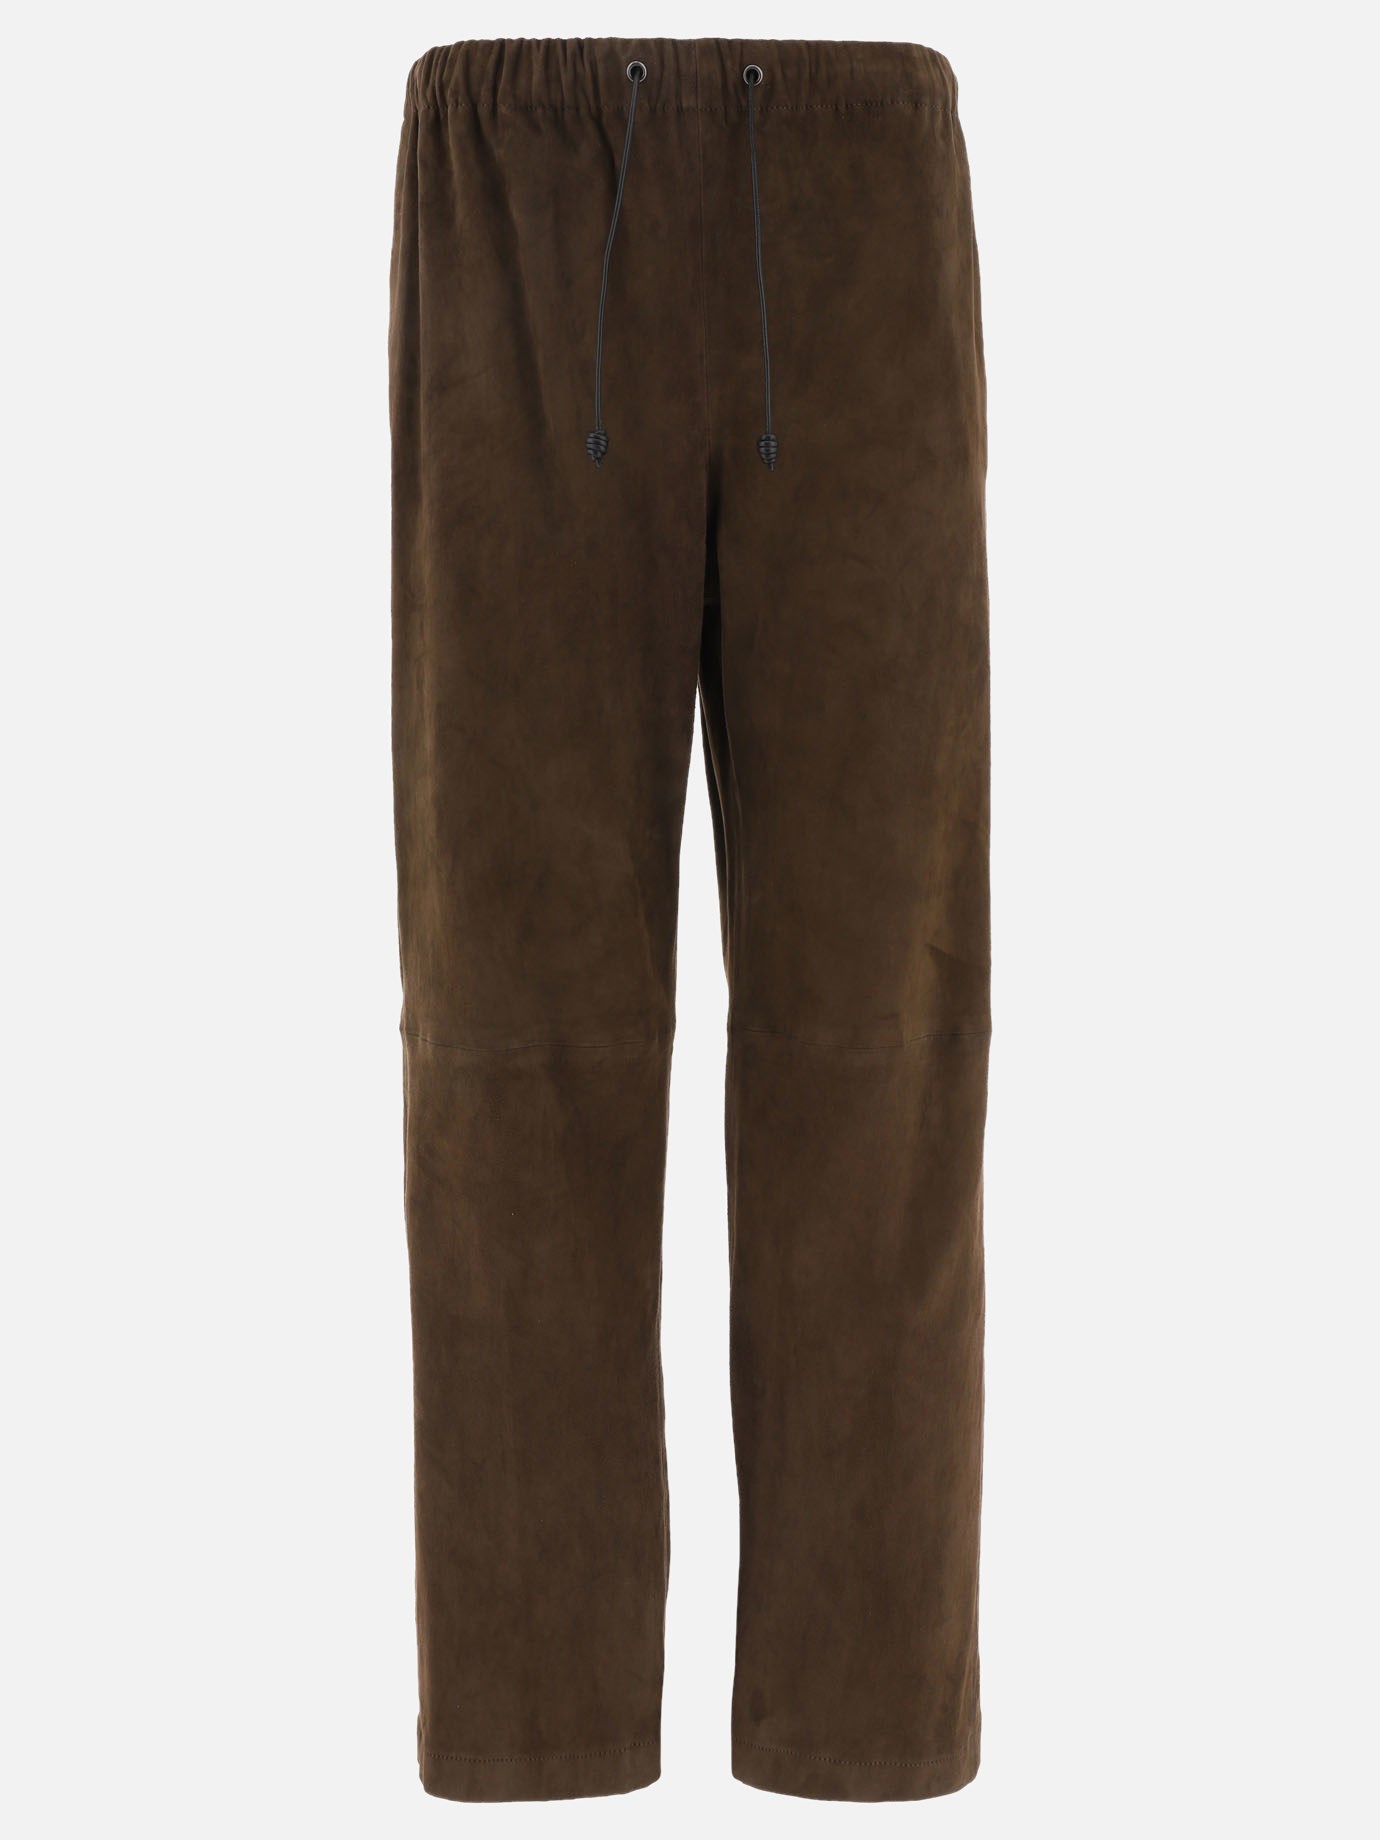 Stretch suede trousers